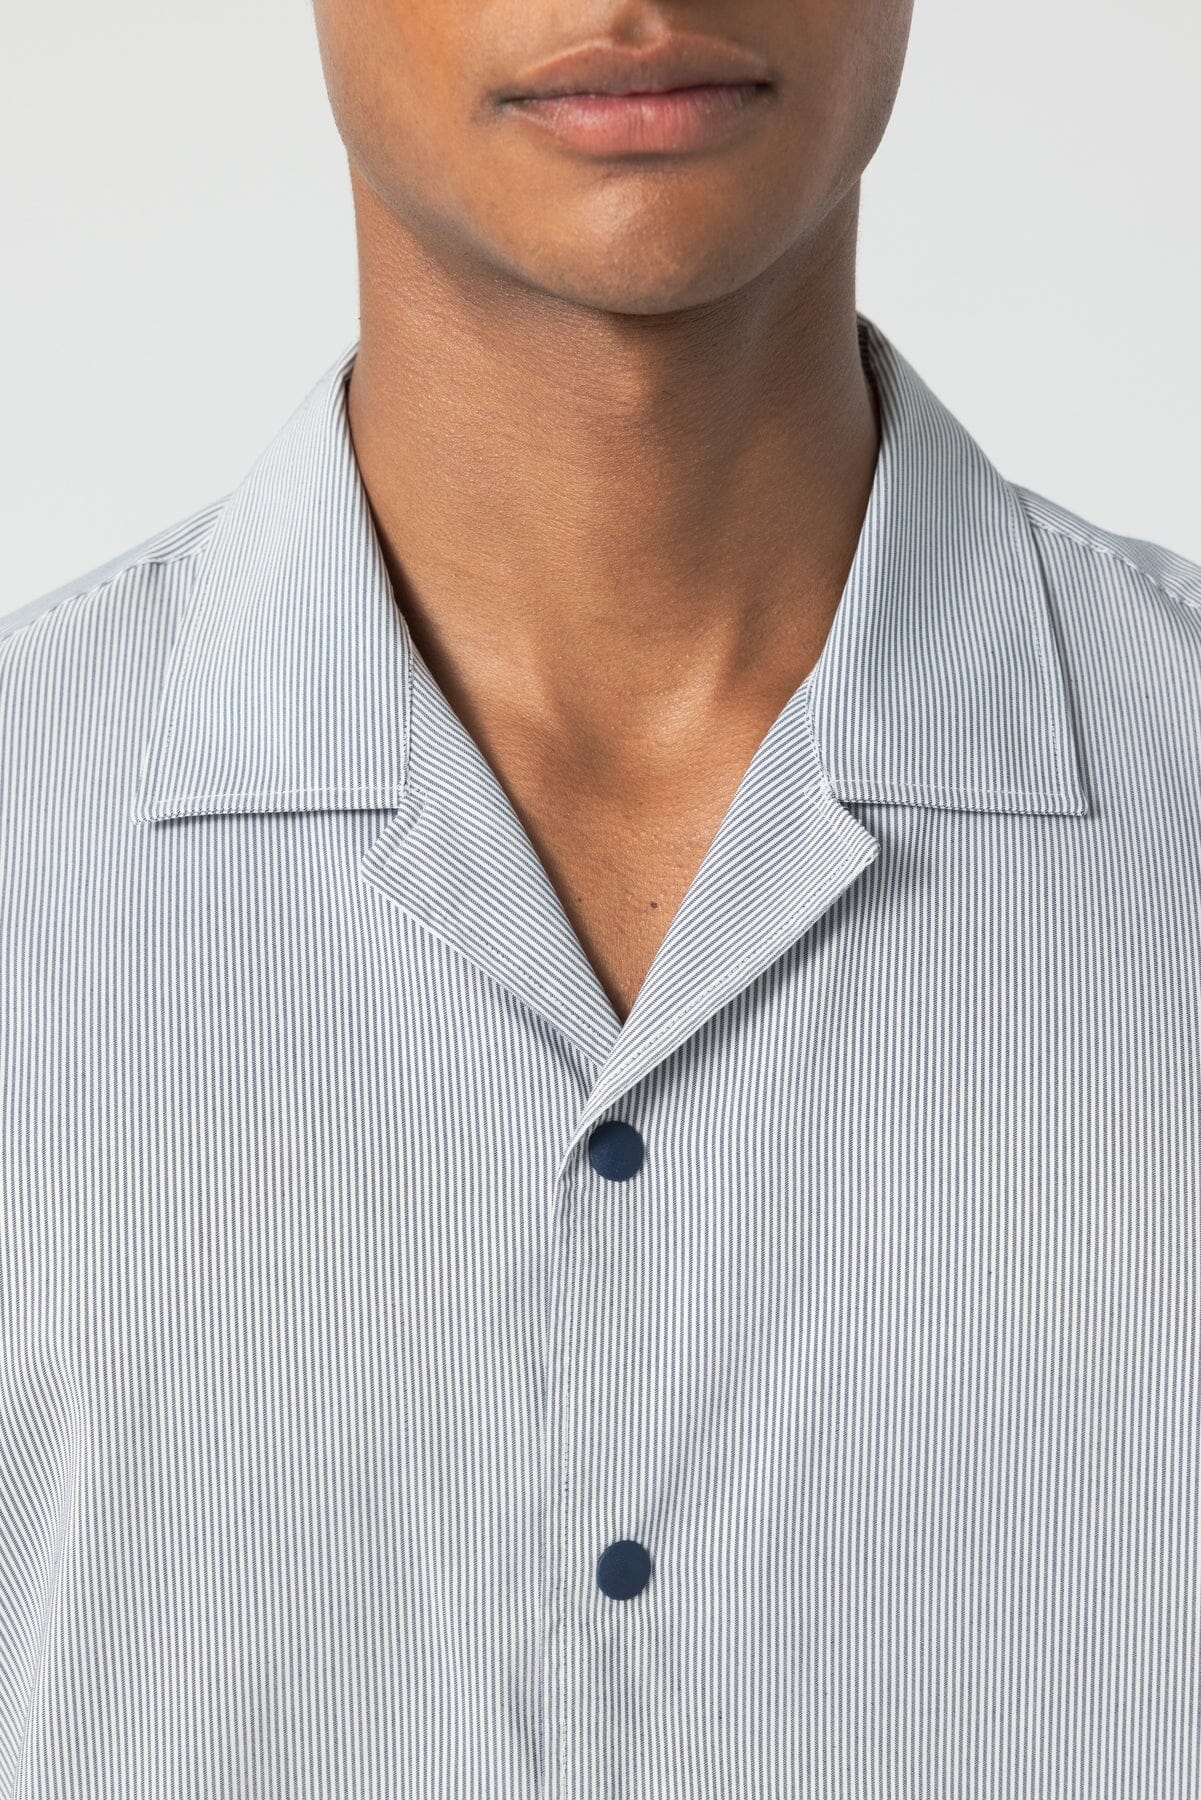 Unfeigned - Short Sleeve Shirt S1 Technical Seaqual - Navy Stripes - City Workshop Men's Supply Co.